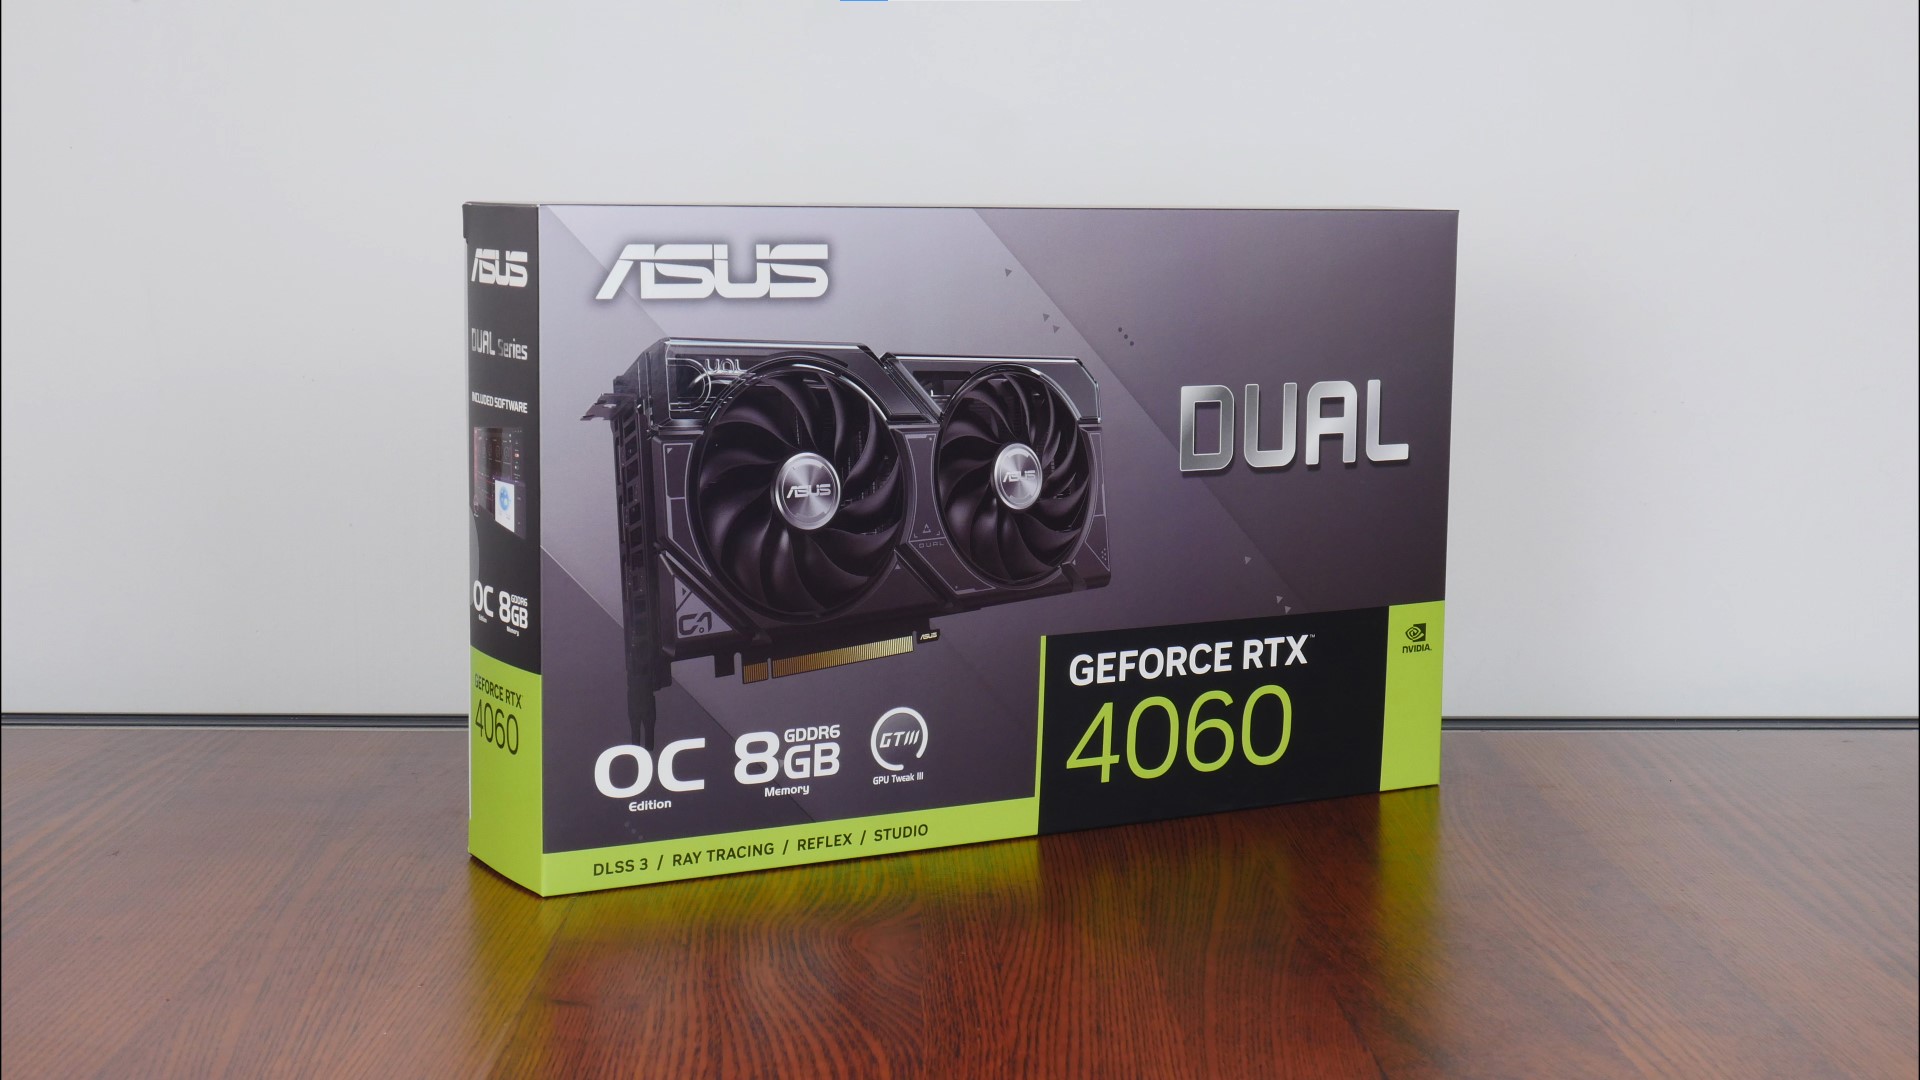 ASUS Dual GeForce RTX 4060 OC Edition 8GB GDDR6 Packaging (Front)